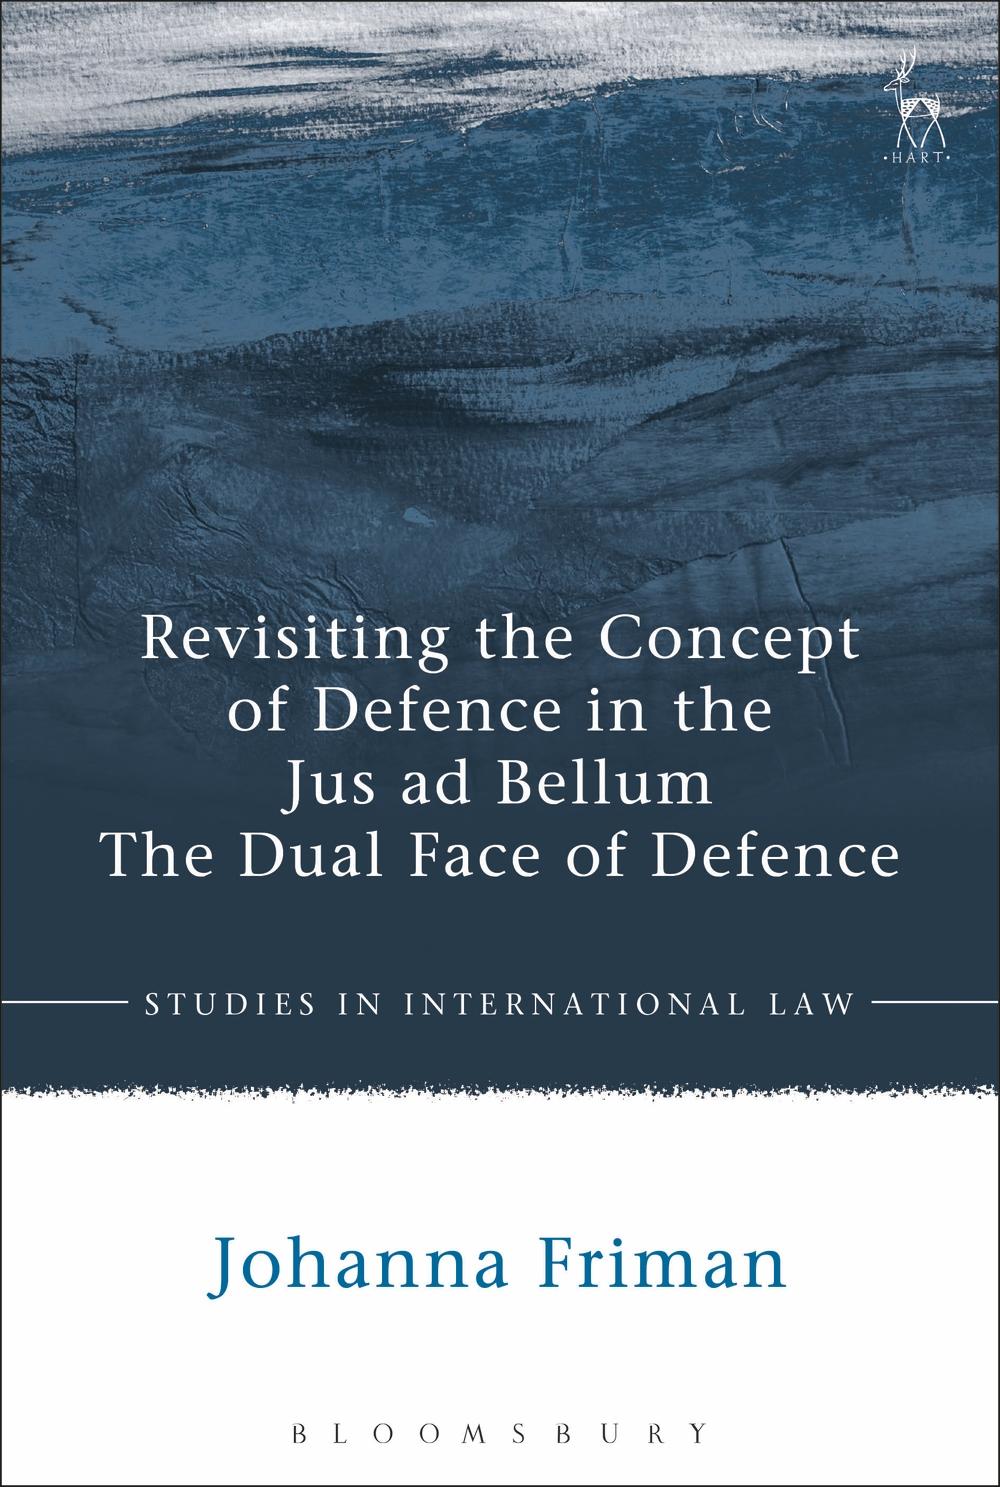 Revisiting the Concept of Defence in the Jus ad Bellum - Johanna Friman